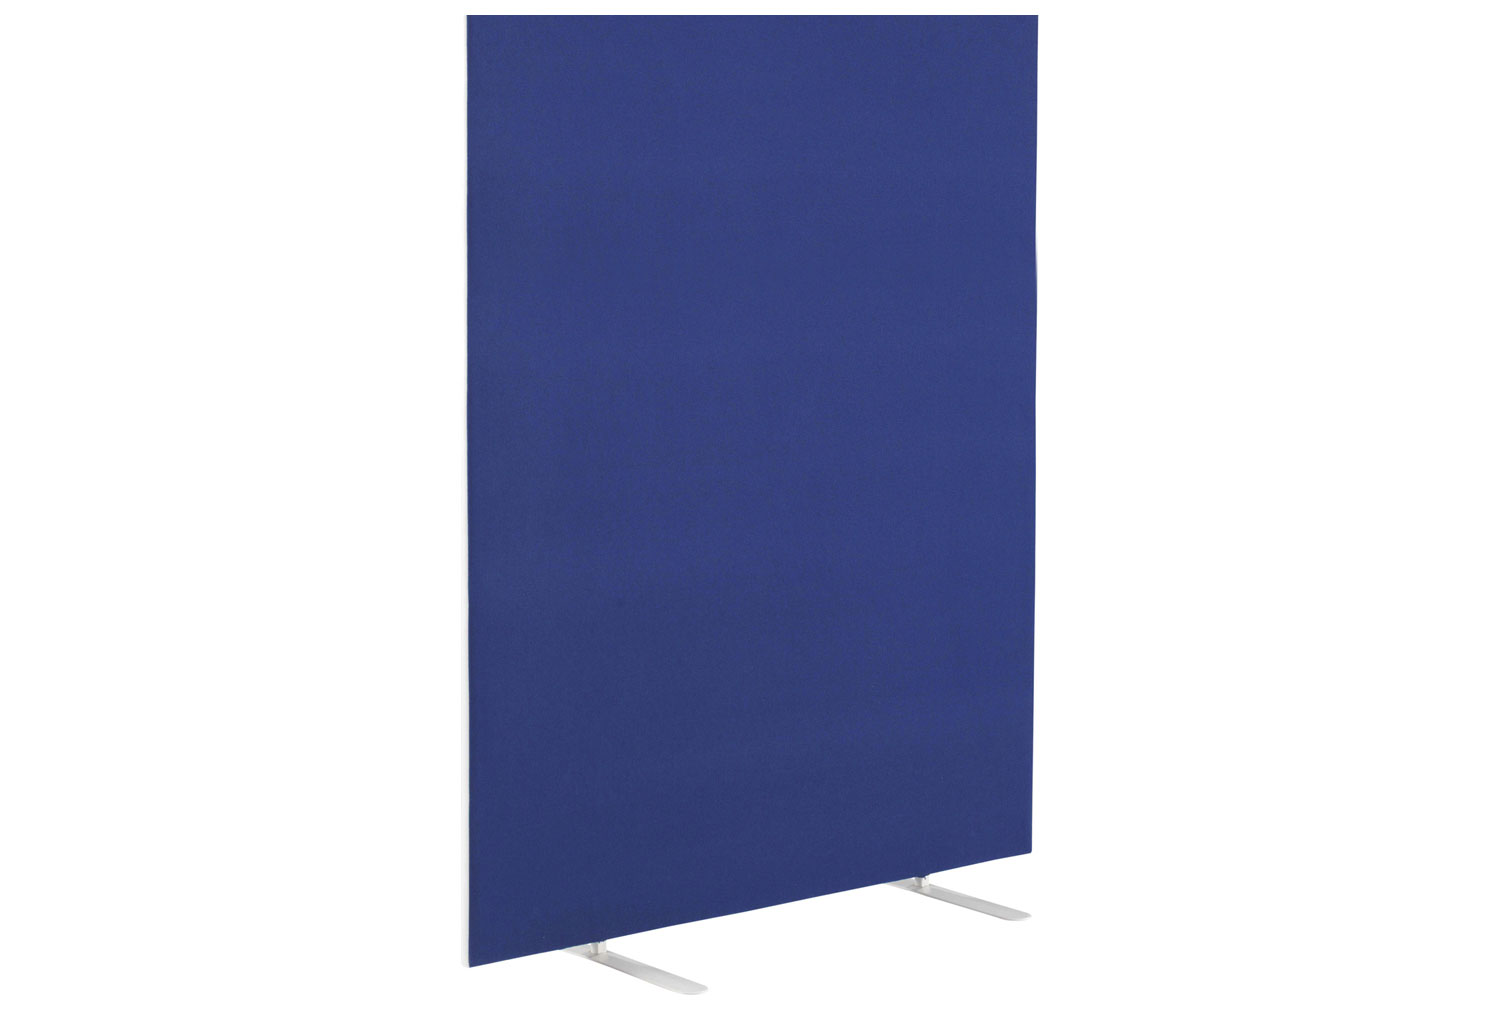 Whist Economy Floor Standing Office Screens, 120wx160h (cm), Royal Blue, Fully Installed